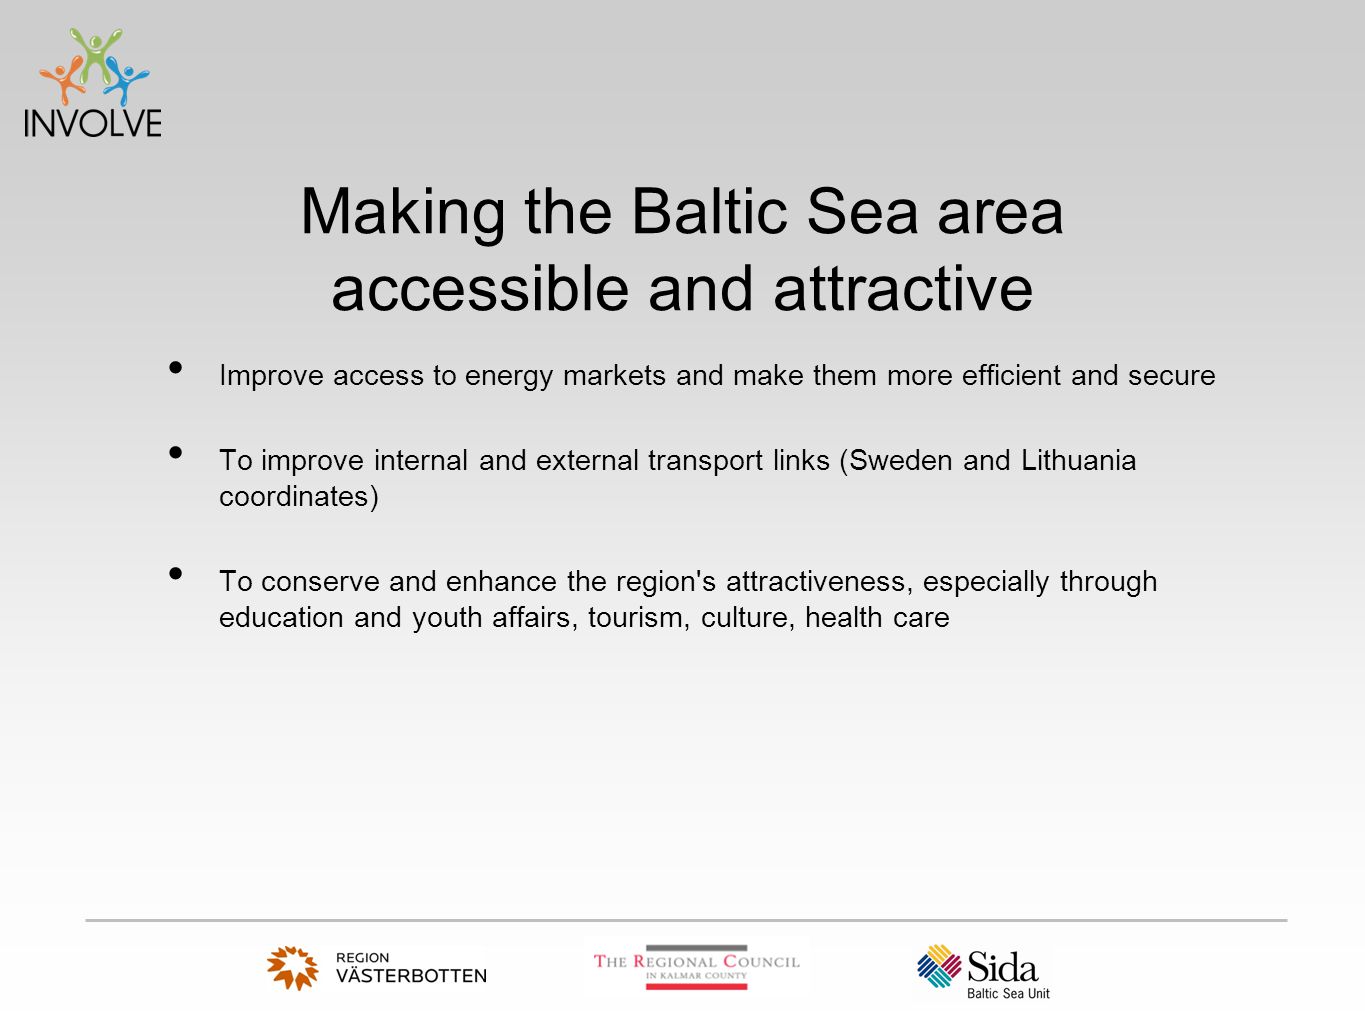 Making the Baltic Sea area accessible and attractive Improve access to energy markets and make them more efficient and secure To improve internal and external transport links (Sweden and Lithuania coordinates) To conserve and enhance the region s attractiveness, especially through education and youth affairs, tourism, culture, health care